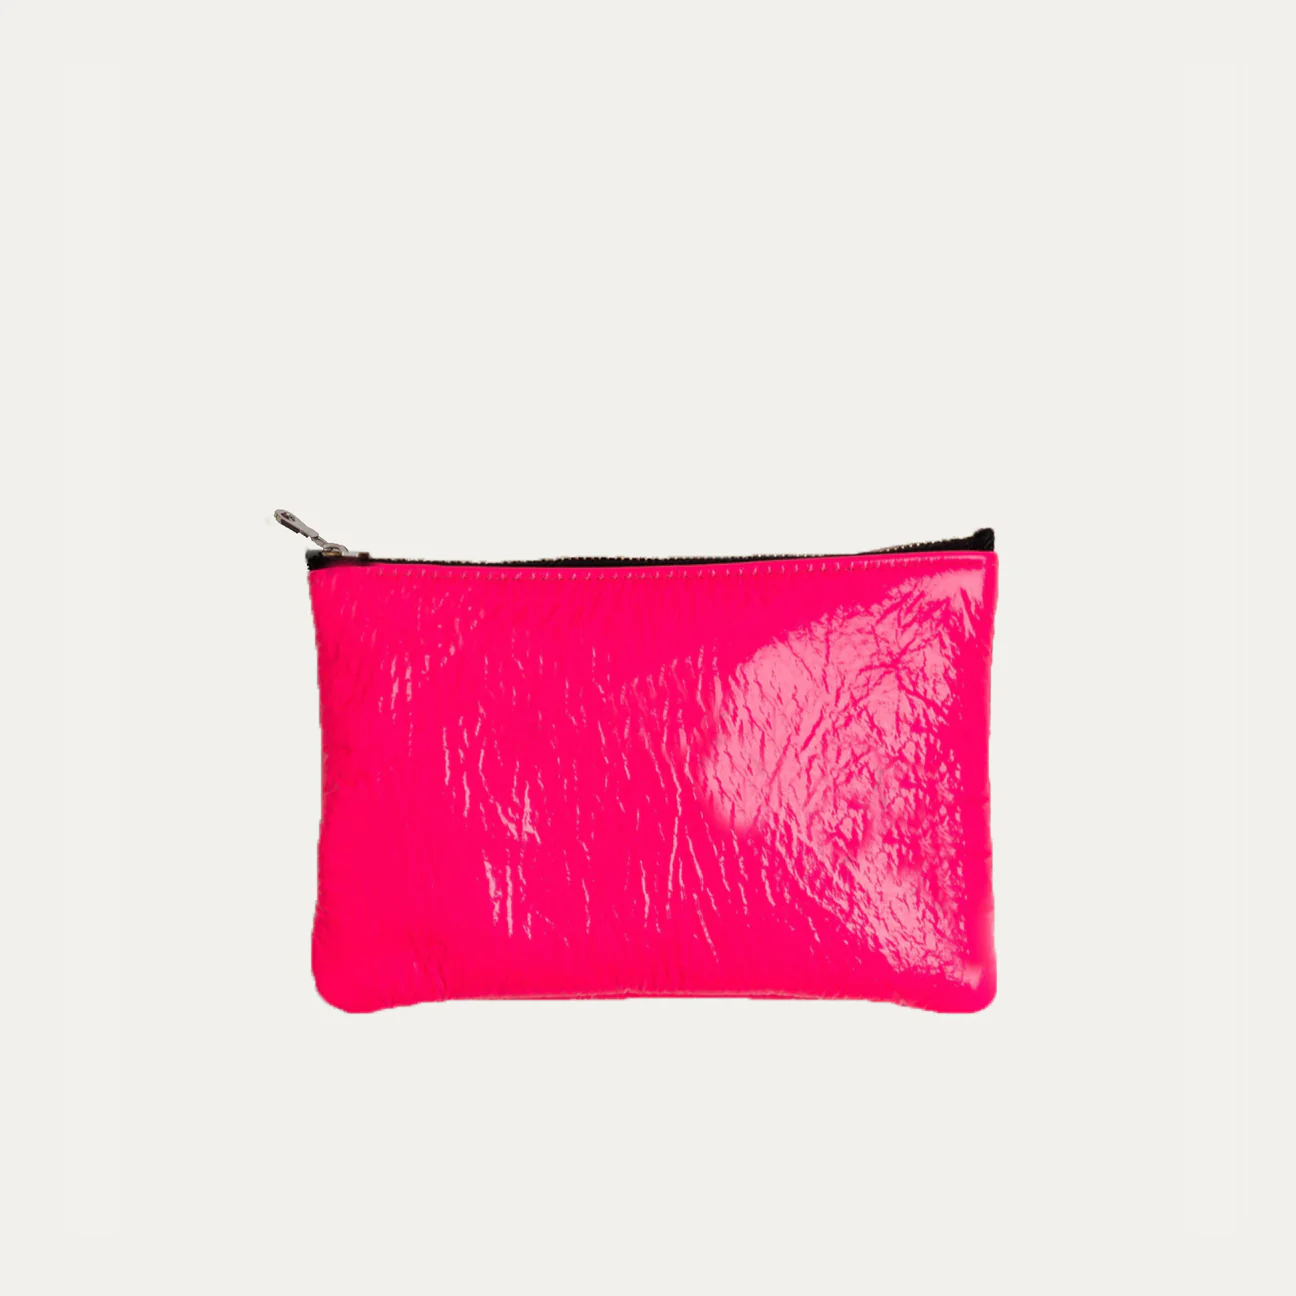 NEP/SH/PPO Pauly Pouch Organizer | Neon Pink + Silver Hardware